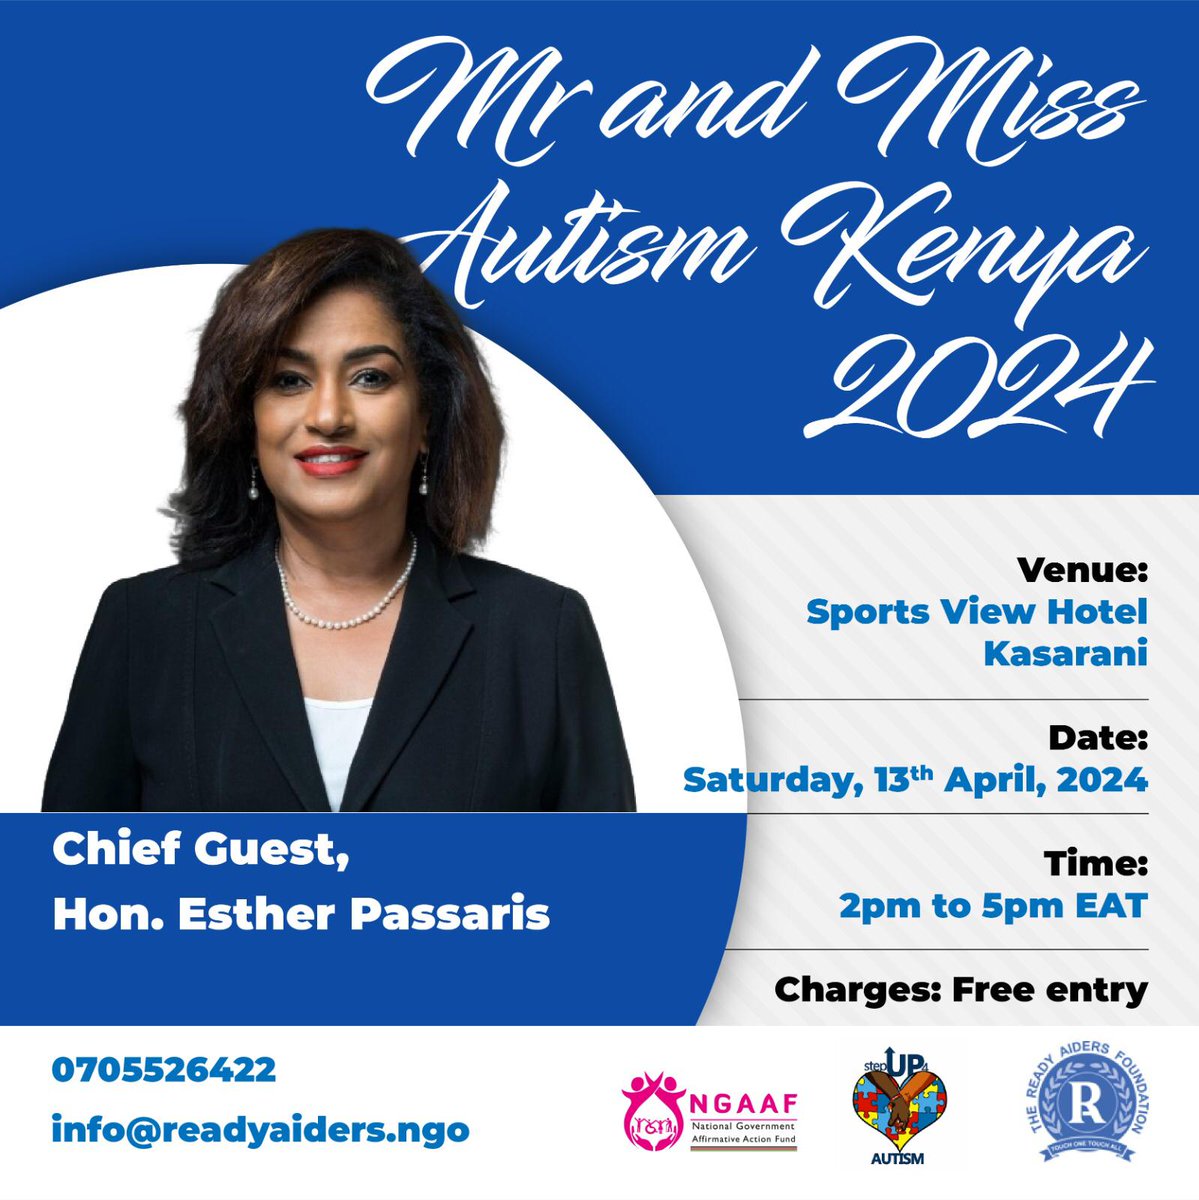 For the 5th year running, @NGAAF_Ke is proud to sponsor the Mr. and Miss Autism Kenya 2024, a calendar event I always look forward to that plays a crucial role in promoting and nurturing the talents of individuals with autism in Kenya. @stepup4autismi1